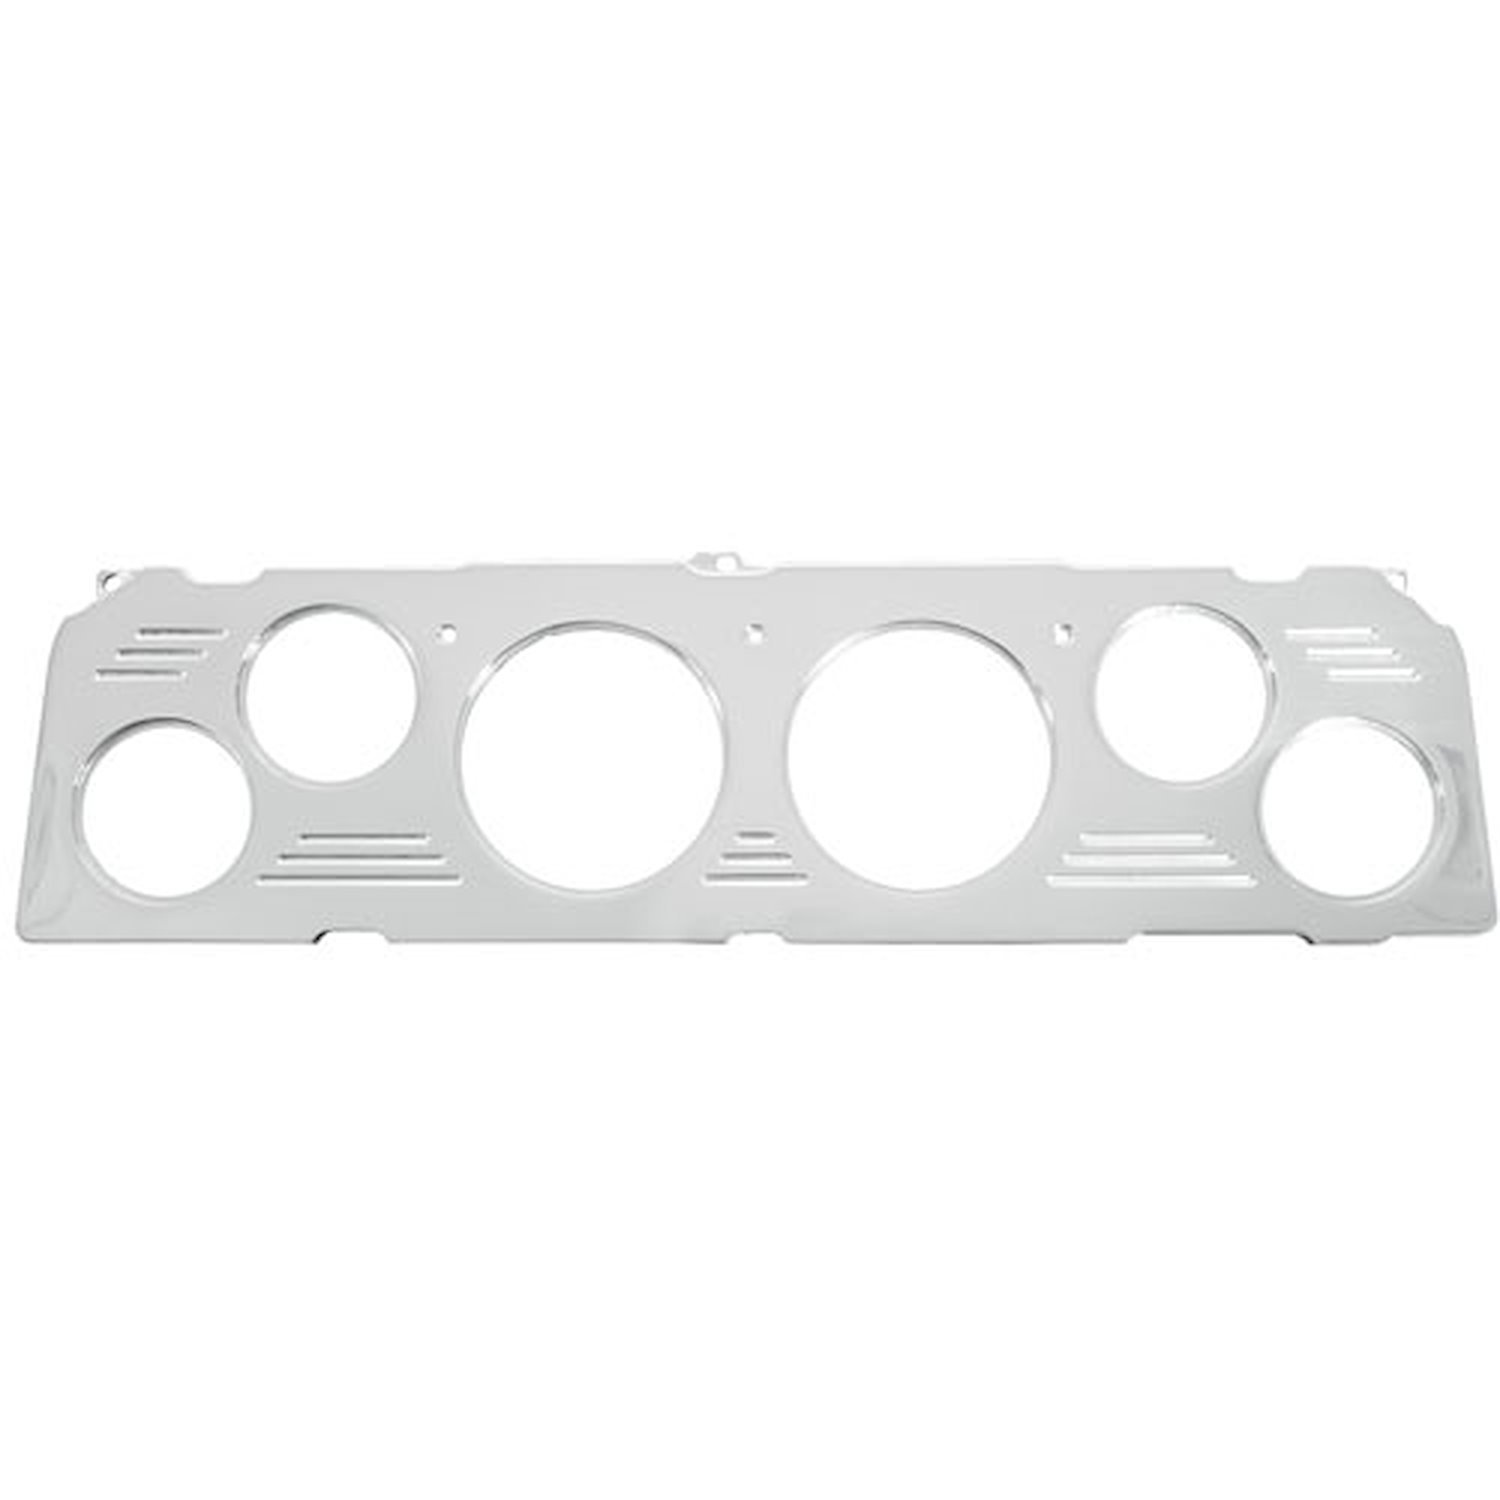 Direct-Fit Dash Panel 1964-66 Chevy Truck